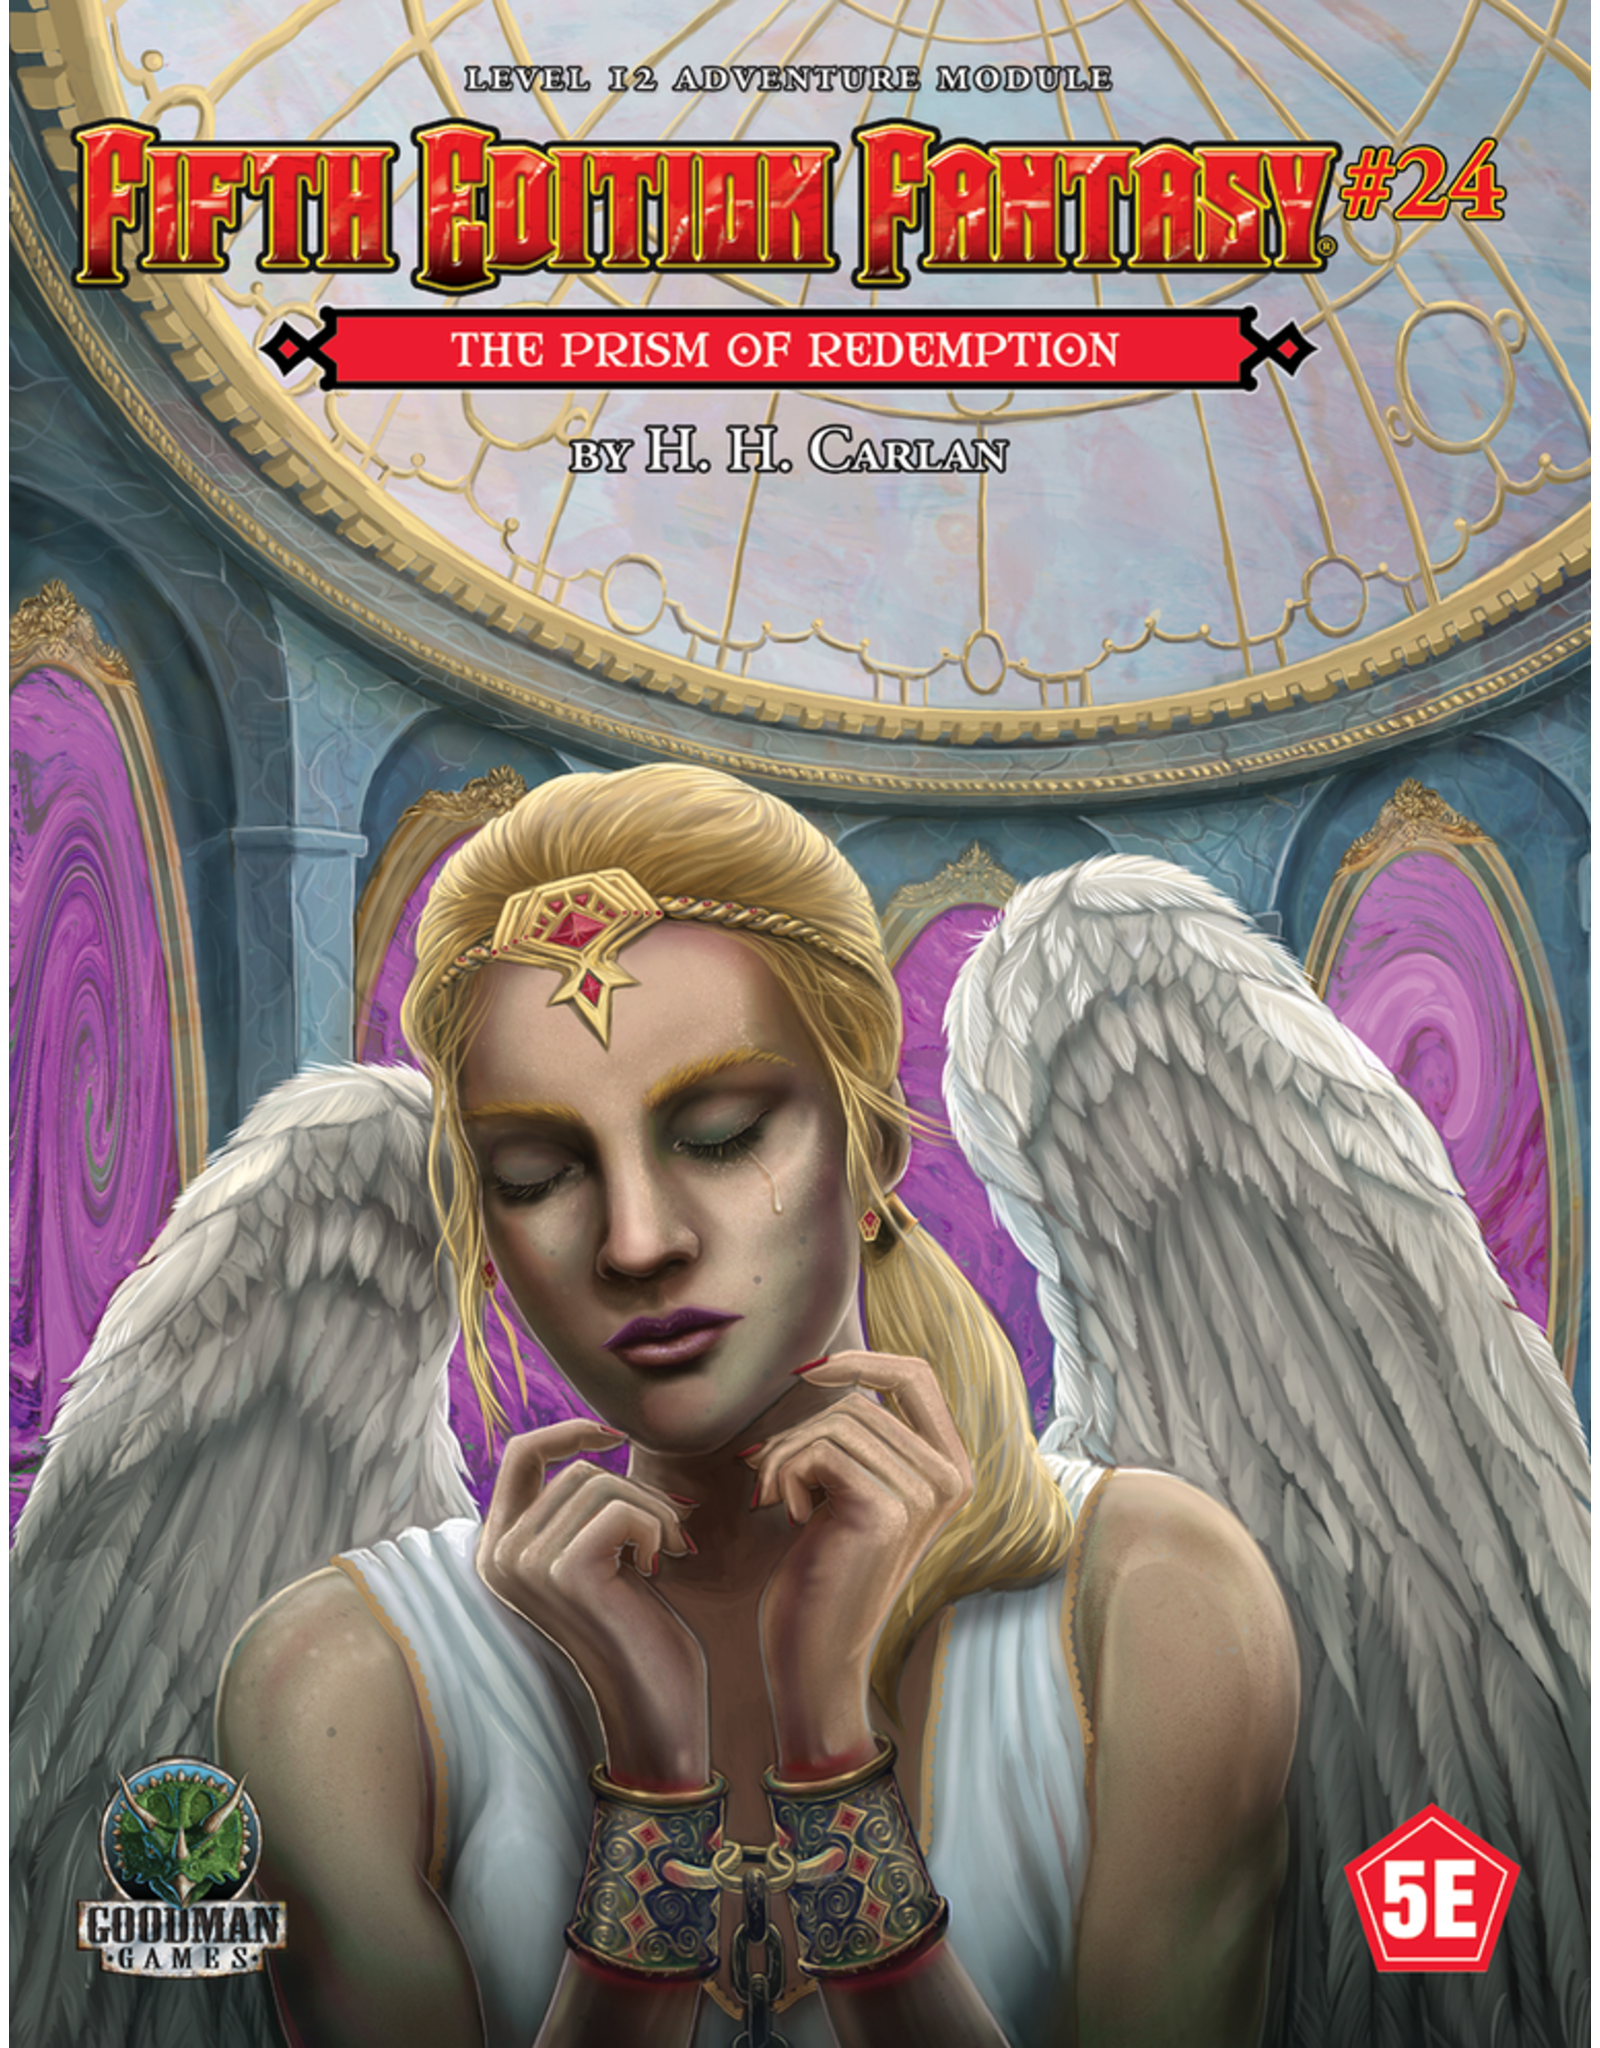 Fifth Edition Fantasy #24: The Prism Of Redemption